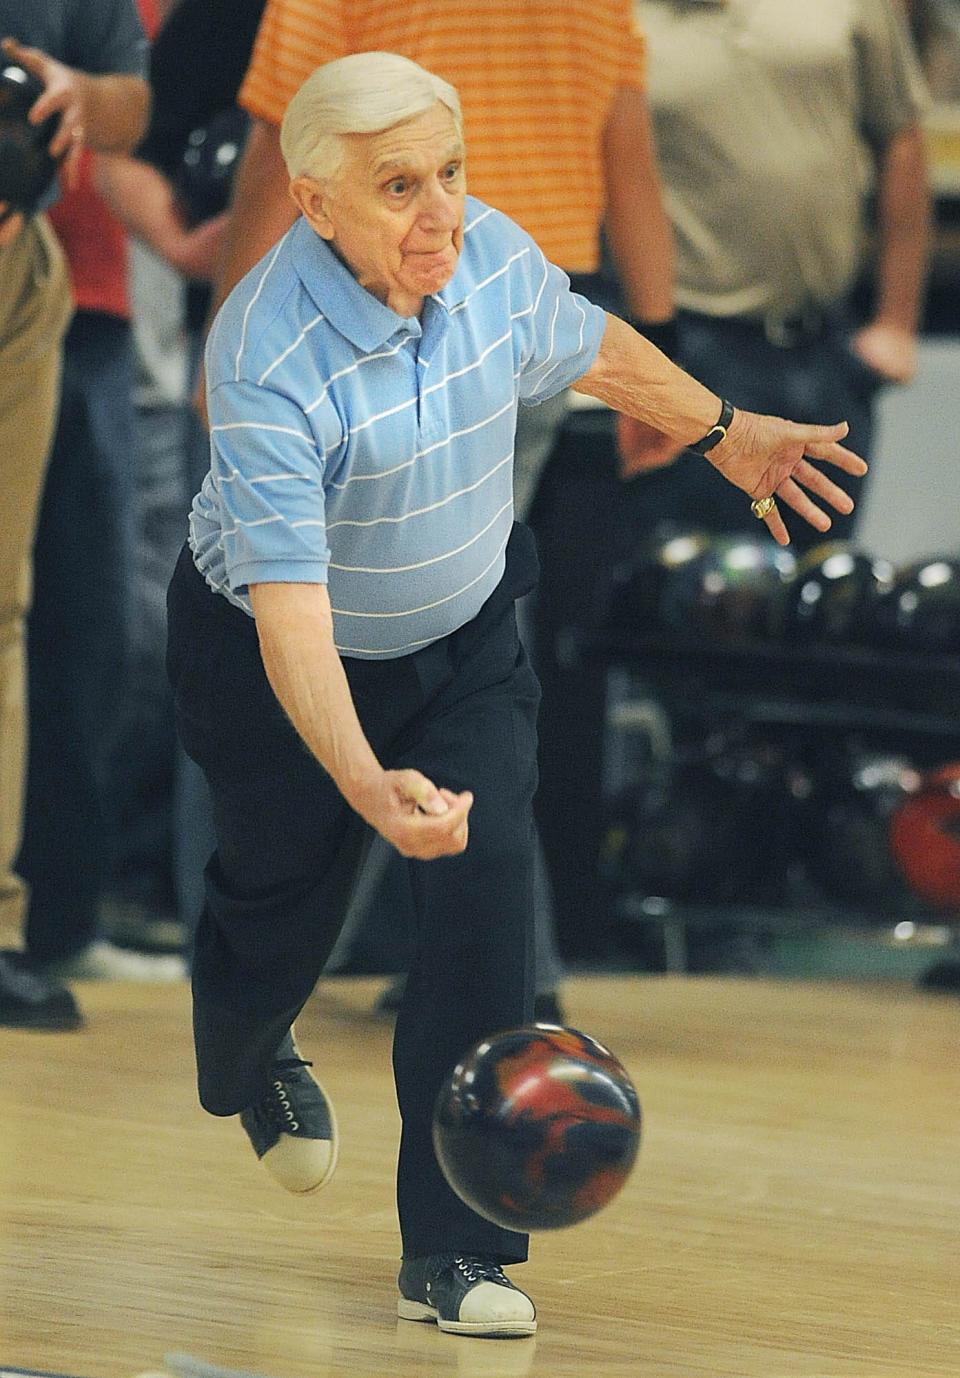 Buddy Malone warms up during the Erie Times-News Open bowling tournament at Greengarden Lanes, in Millcreek Township, on Jan. 7, 2012. It was Malone's 49th Times-News Open.